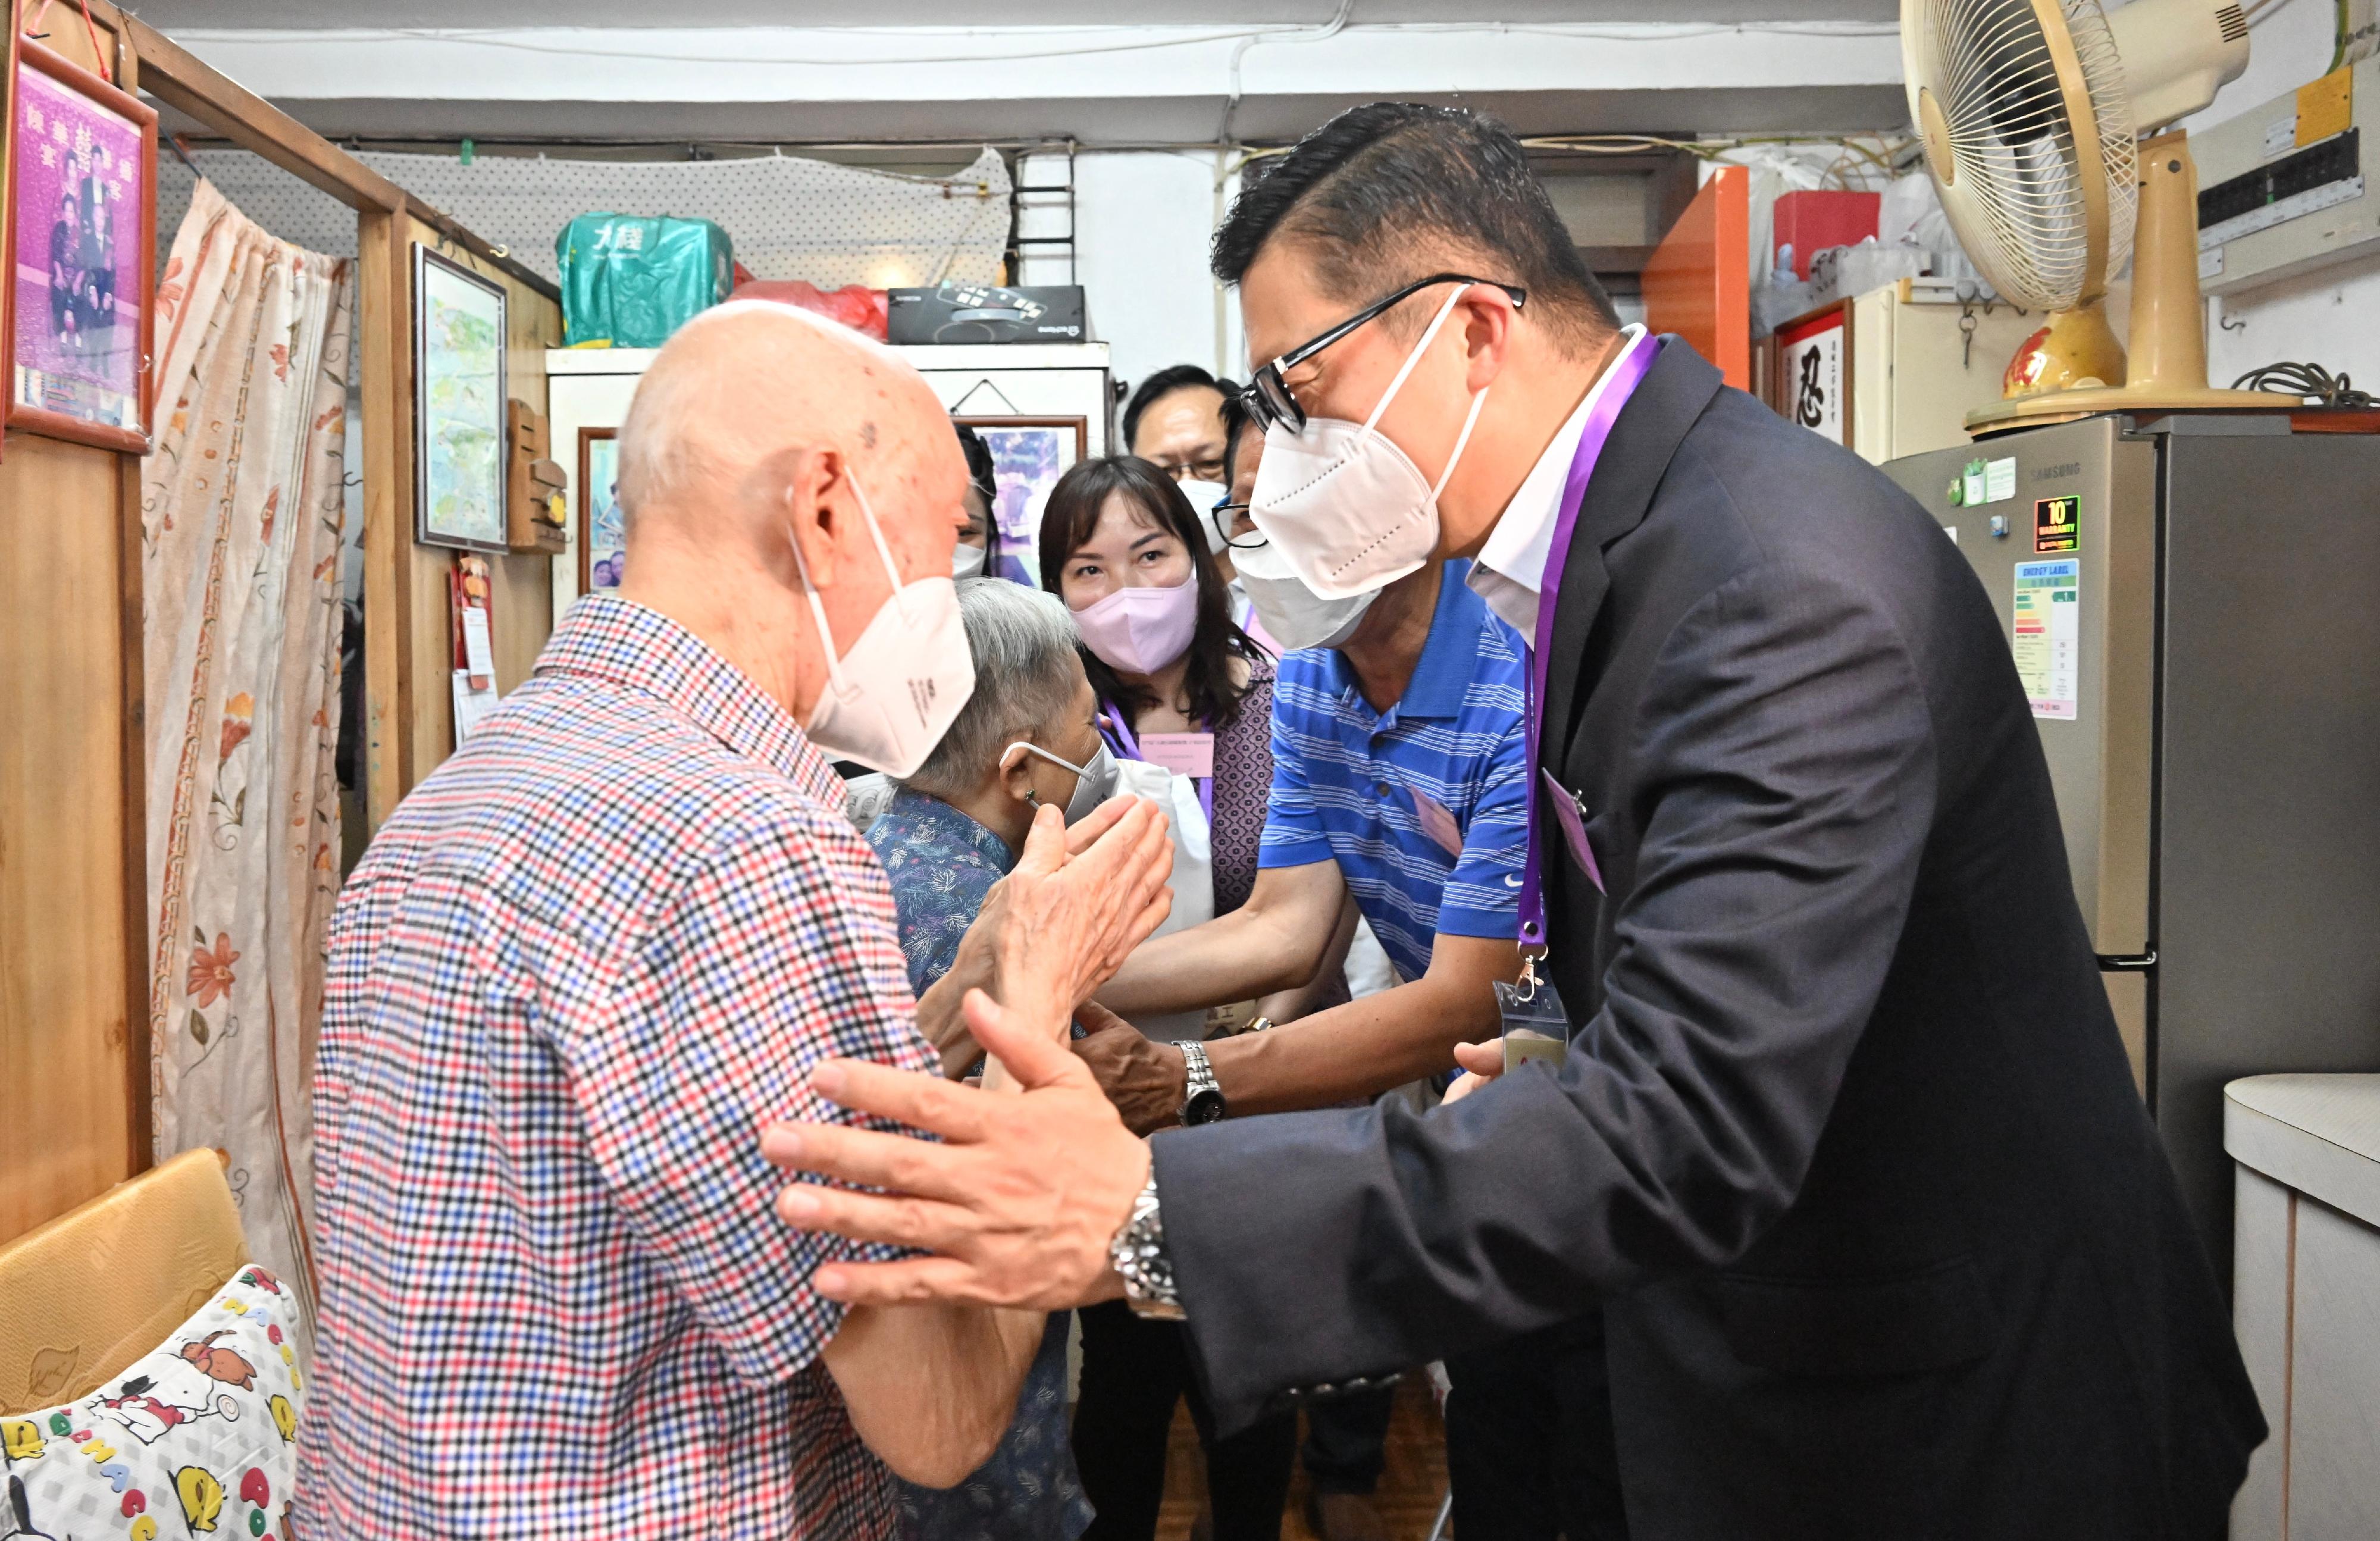 The Secretary for Security, Mr Tang Ping-keung, today (June 19) paid home visits under the Celebrations for All project in Tuen Mun District to show his care and concern for the grass-roots families, and distributed gift packs in celebration of the 25th anniversary of the establishment of the Hong Kong Special Administrative Region. Photo shows Mr Tang (first right) visiting an elderly doubleton household in Tai Hing Estate, learning more about their daily lives.